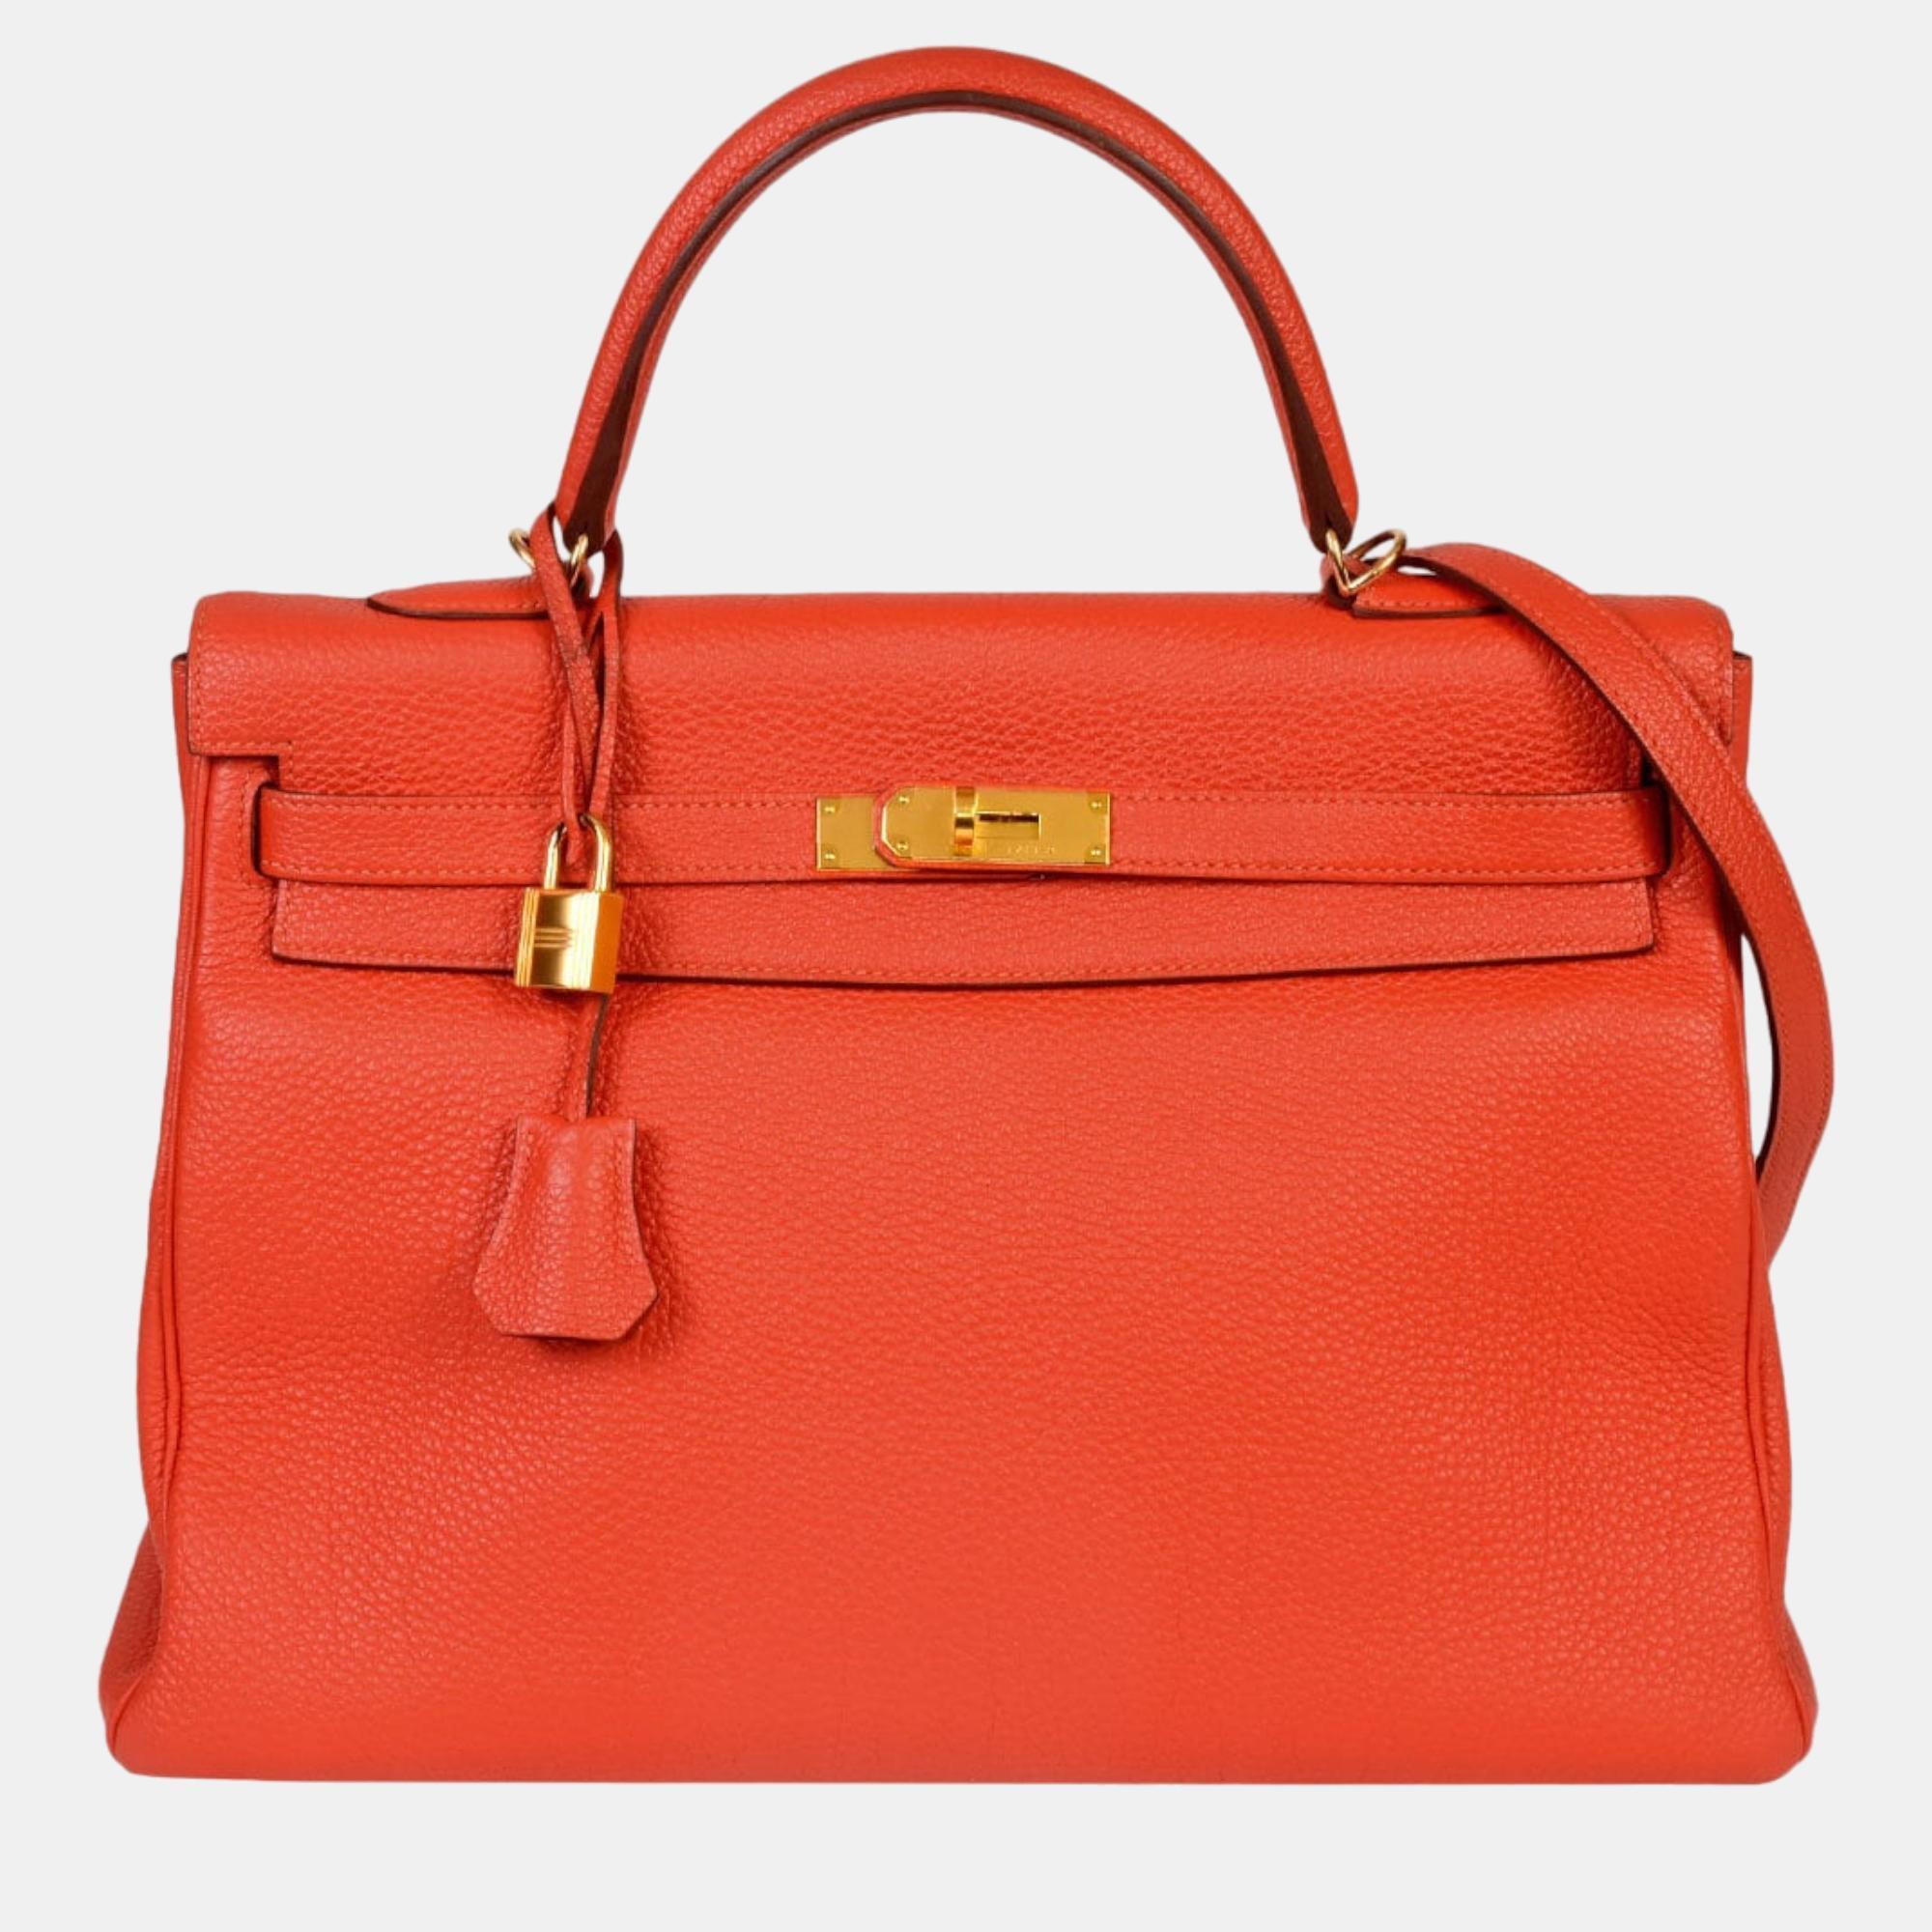 

Hermes Kelly 35 Inner Sewing Capucines Togo Q Engraved (manufactured in 2013) Handbag, Red